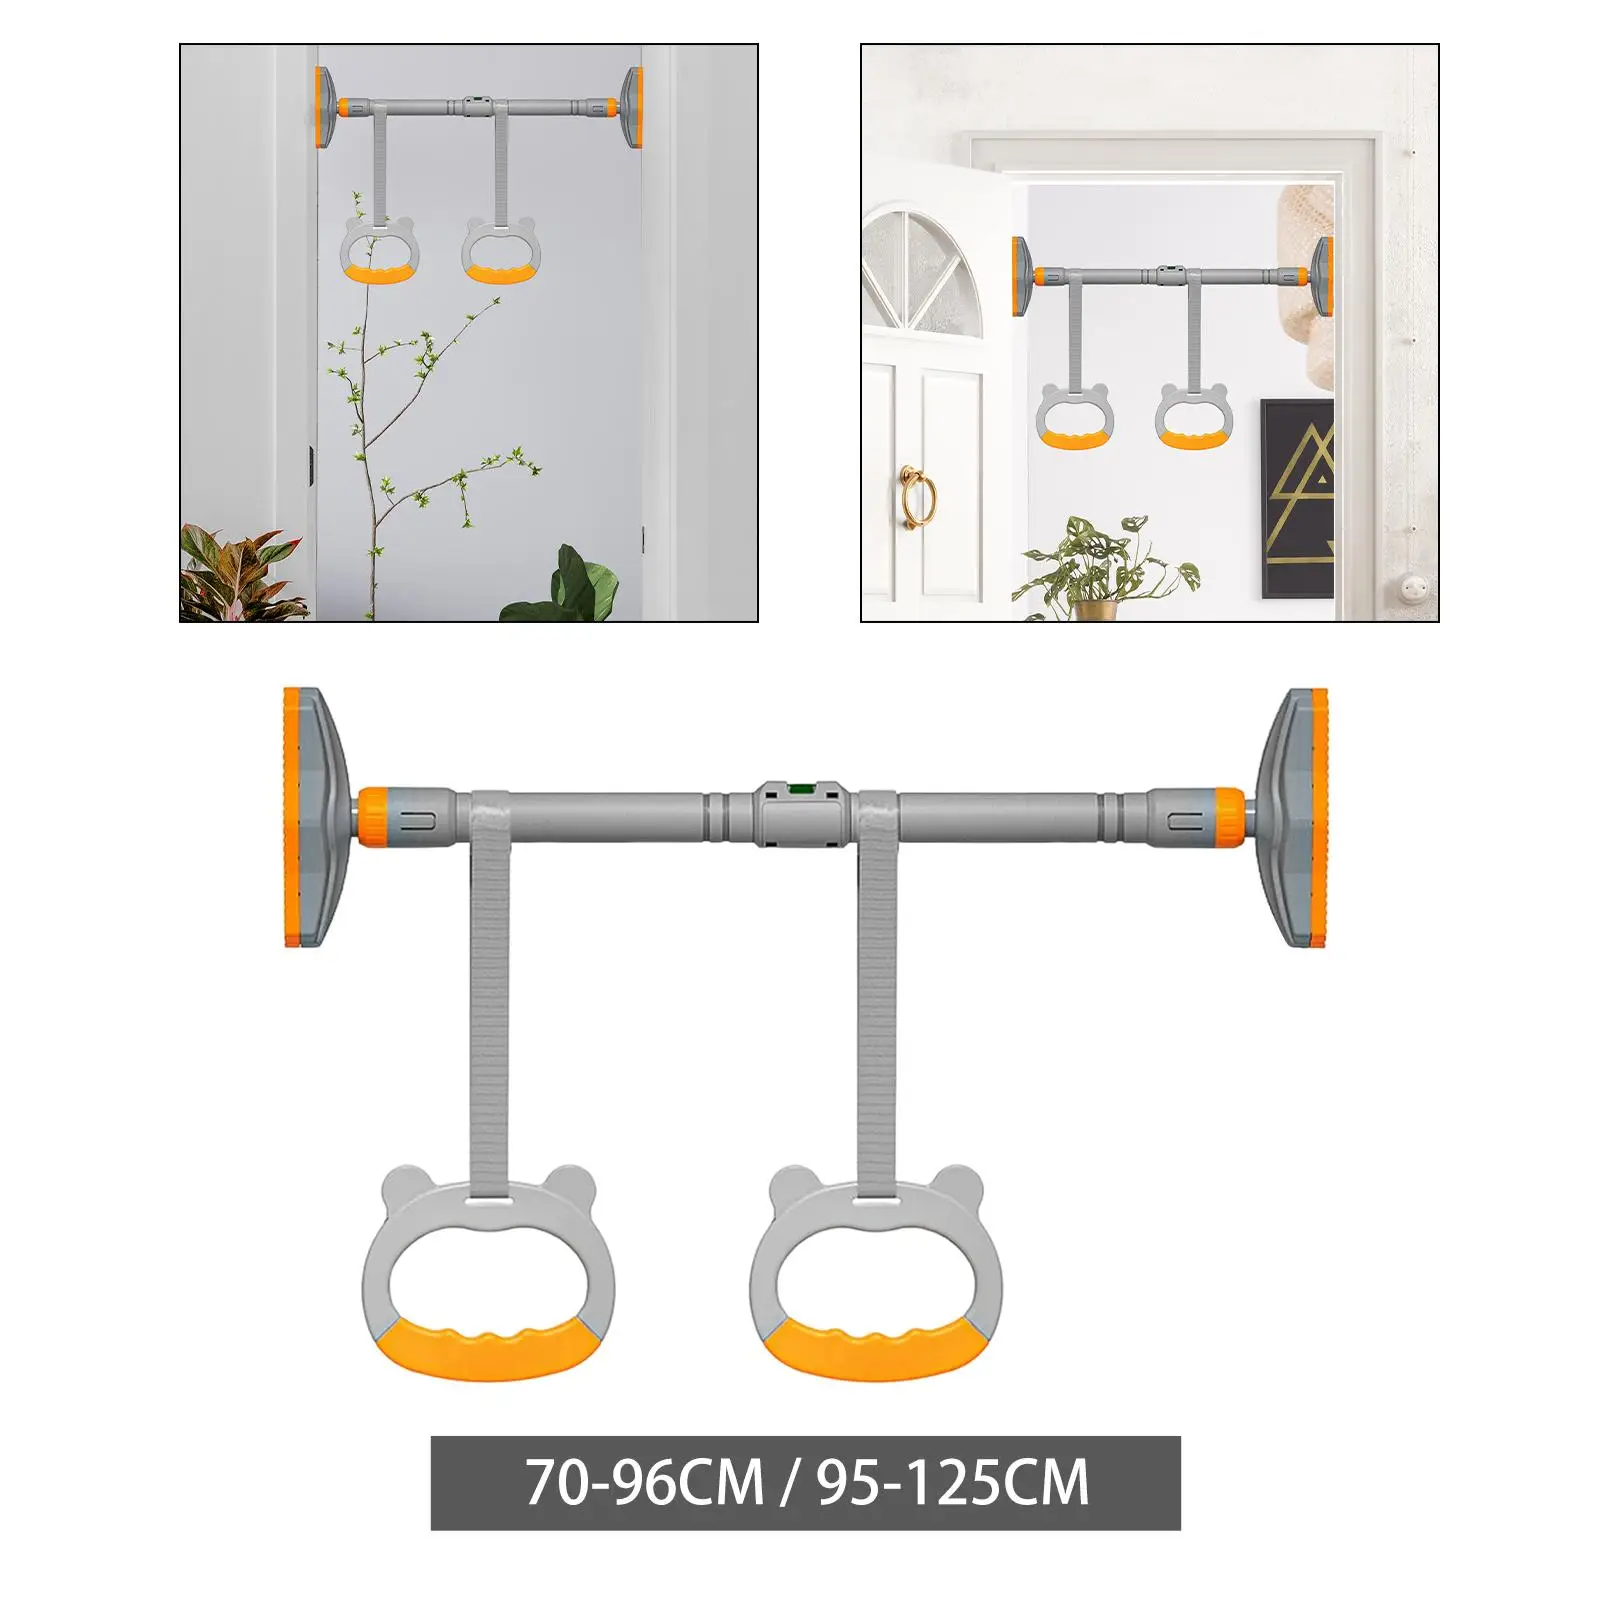 Door Horizontal Bar Steel Adjustable Training Bars For Sport Workout Pull Up Arm Training Sit Up Bar Fitness Equipment